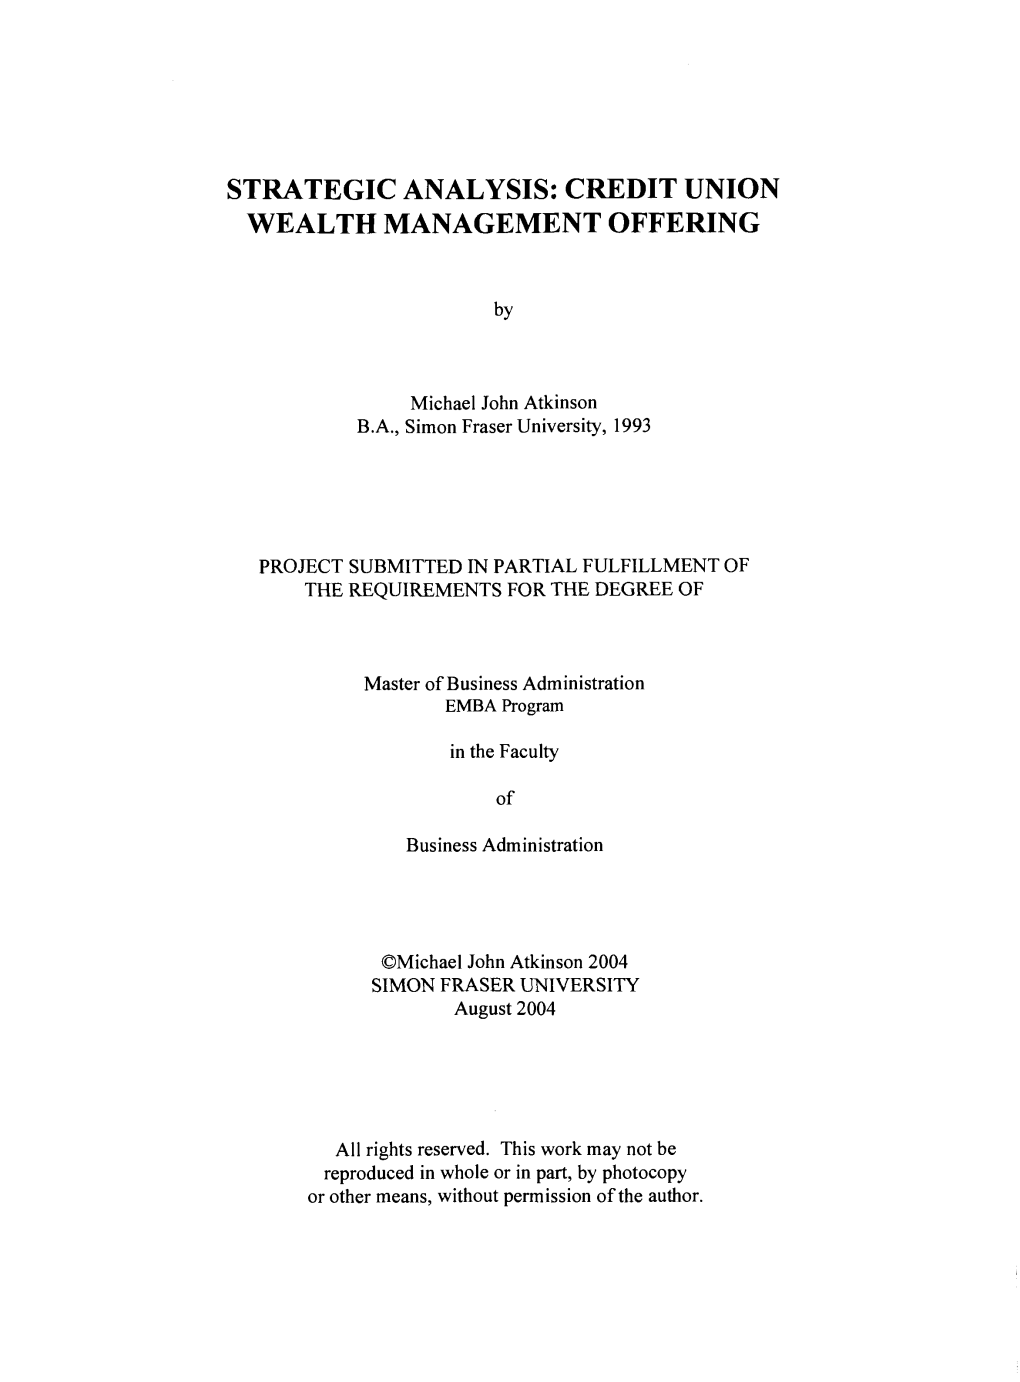 Credit Union Wealth Management Offering / by Michael John Atkinson